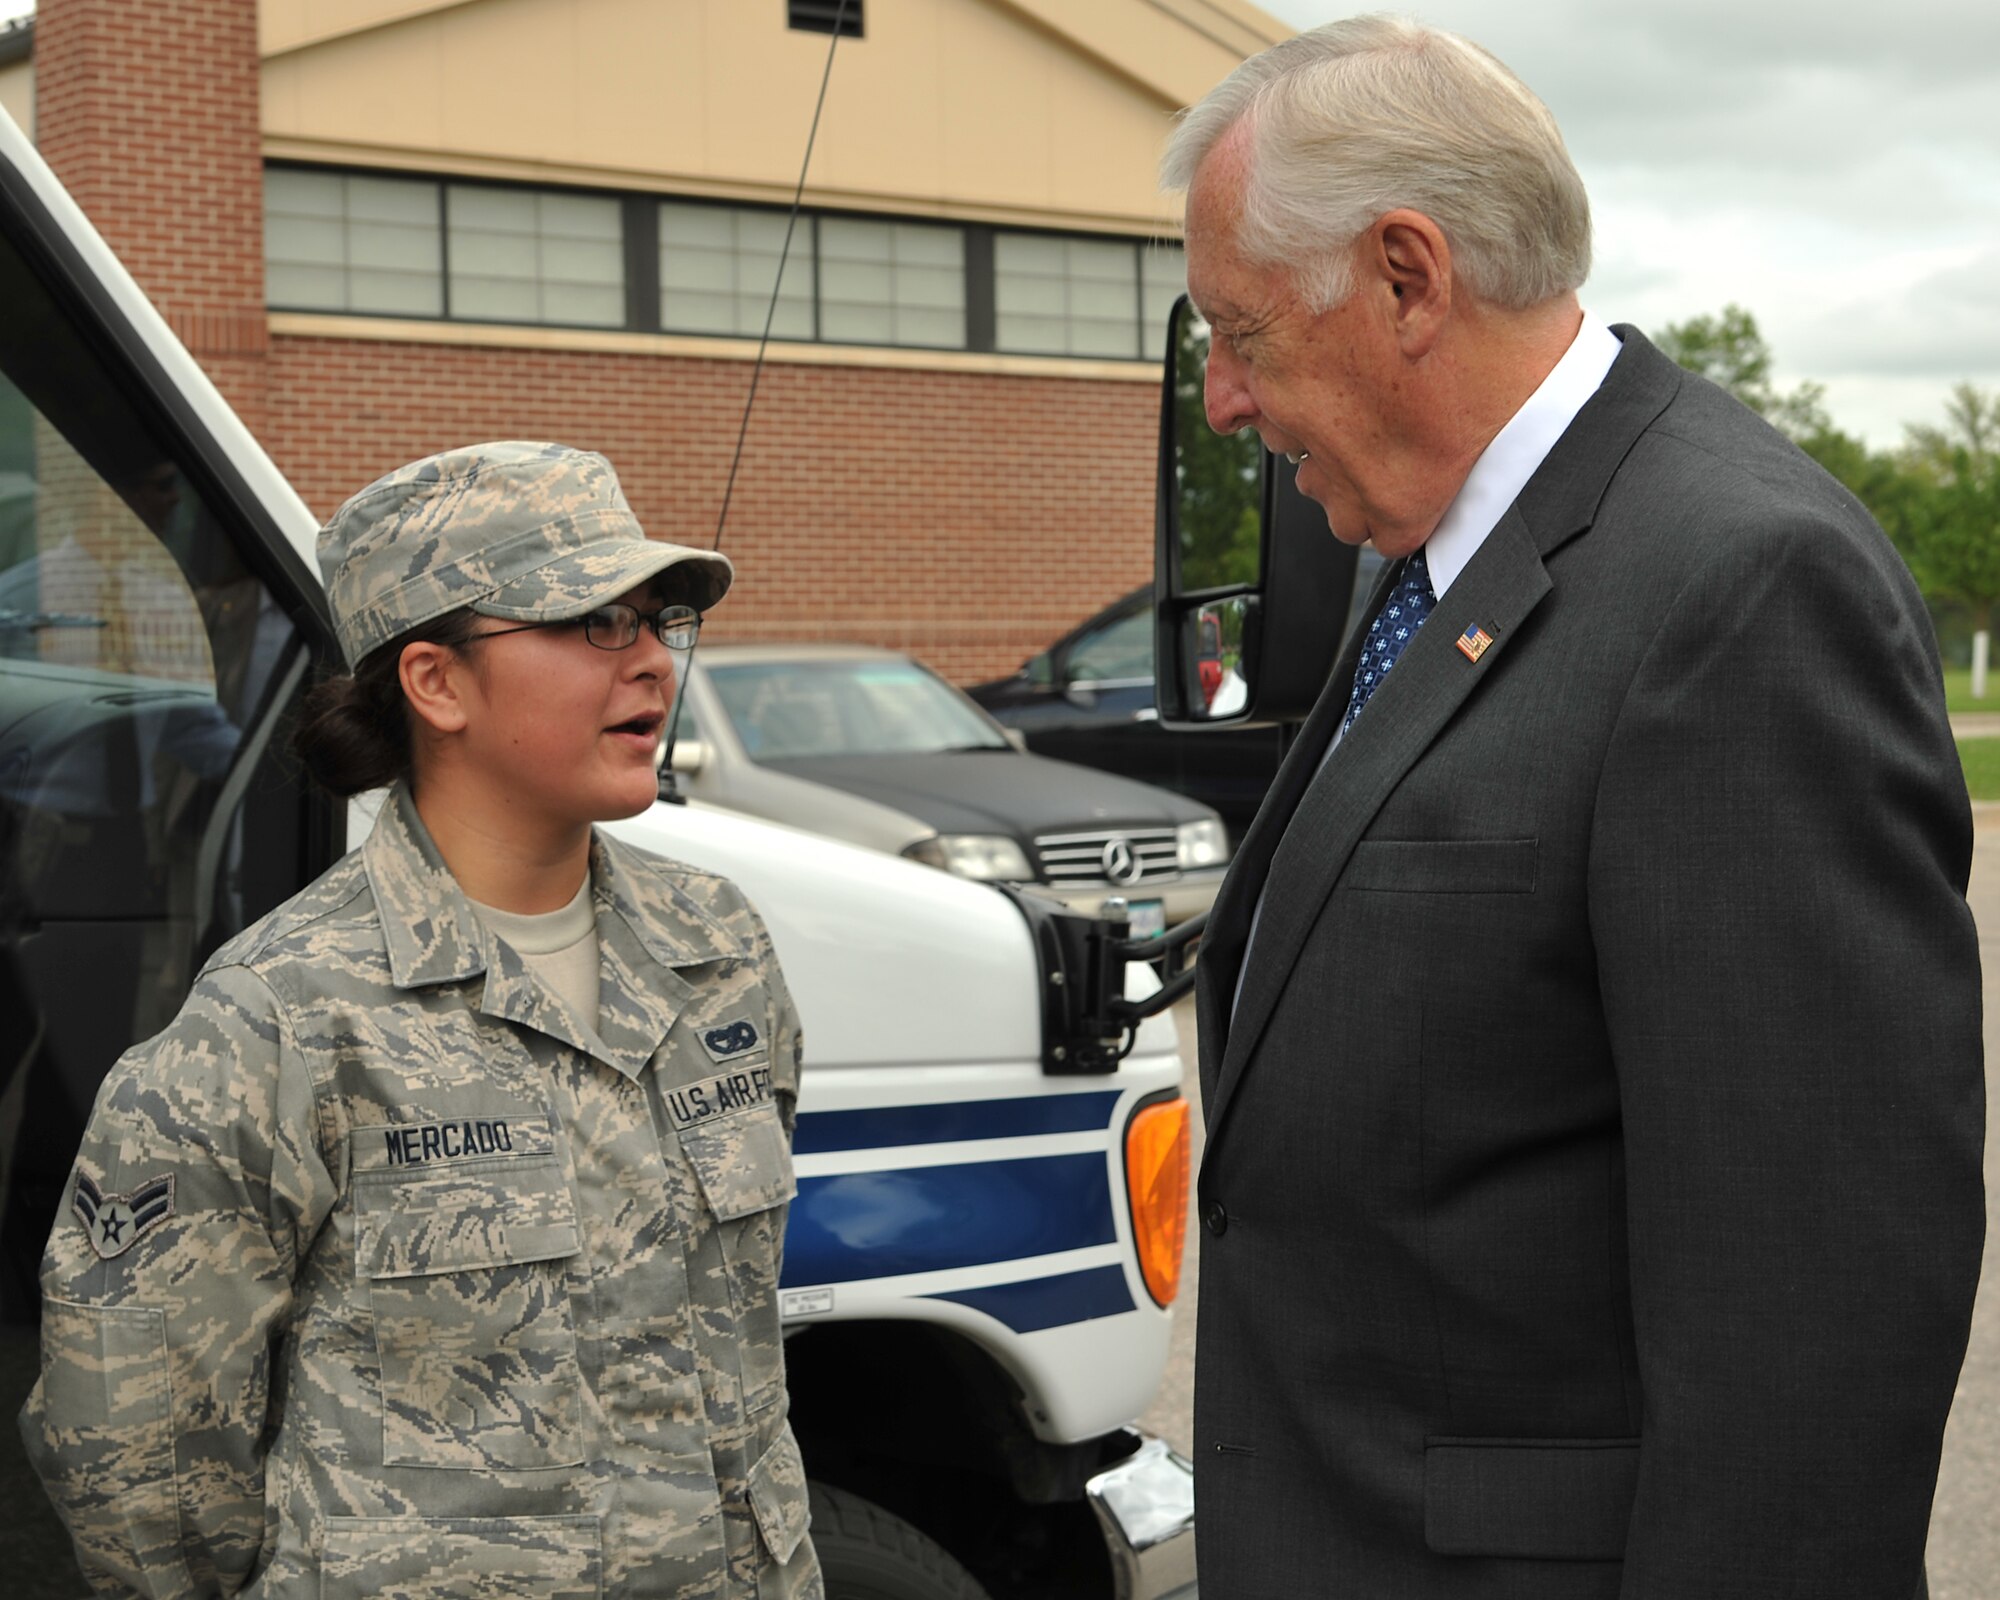 Congressman Steny Hoyer speaks with Airman 1st Class Jacqueline Mercado, 319th Logistics Readiness Squadron vehicle operator, about the LRS mission on Grand Forks Air Force Base, N.D., Aug. 28, 2014. Hoyer visited the base to learn about the Global Hawk mission and the integration of unmanned aircraft into commercial airspace. (U.S. Air Force photo/Senior Airman Xavier Navarro)